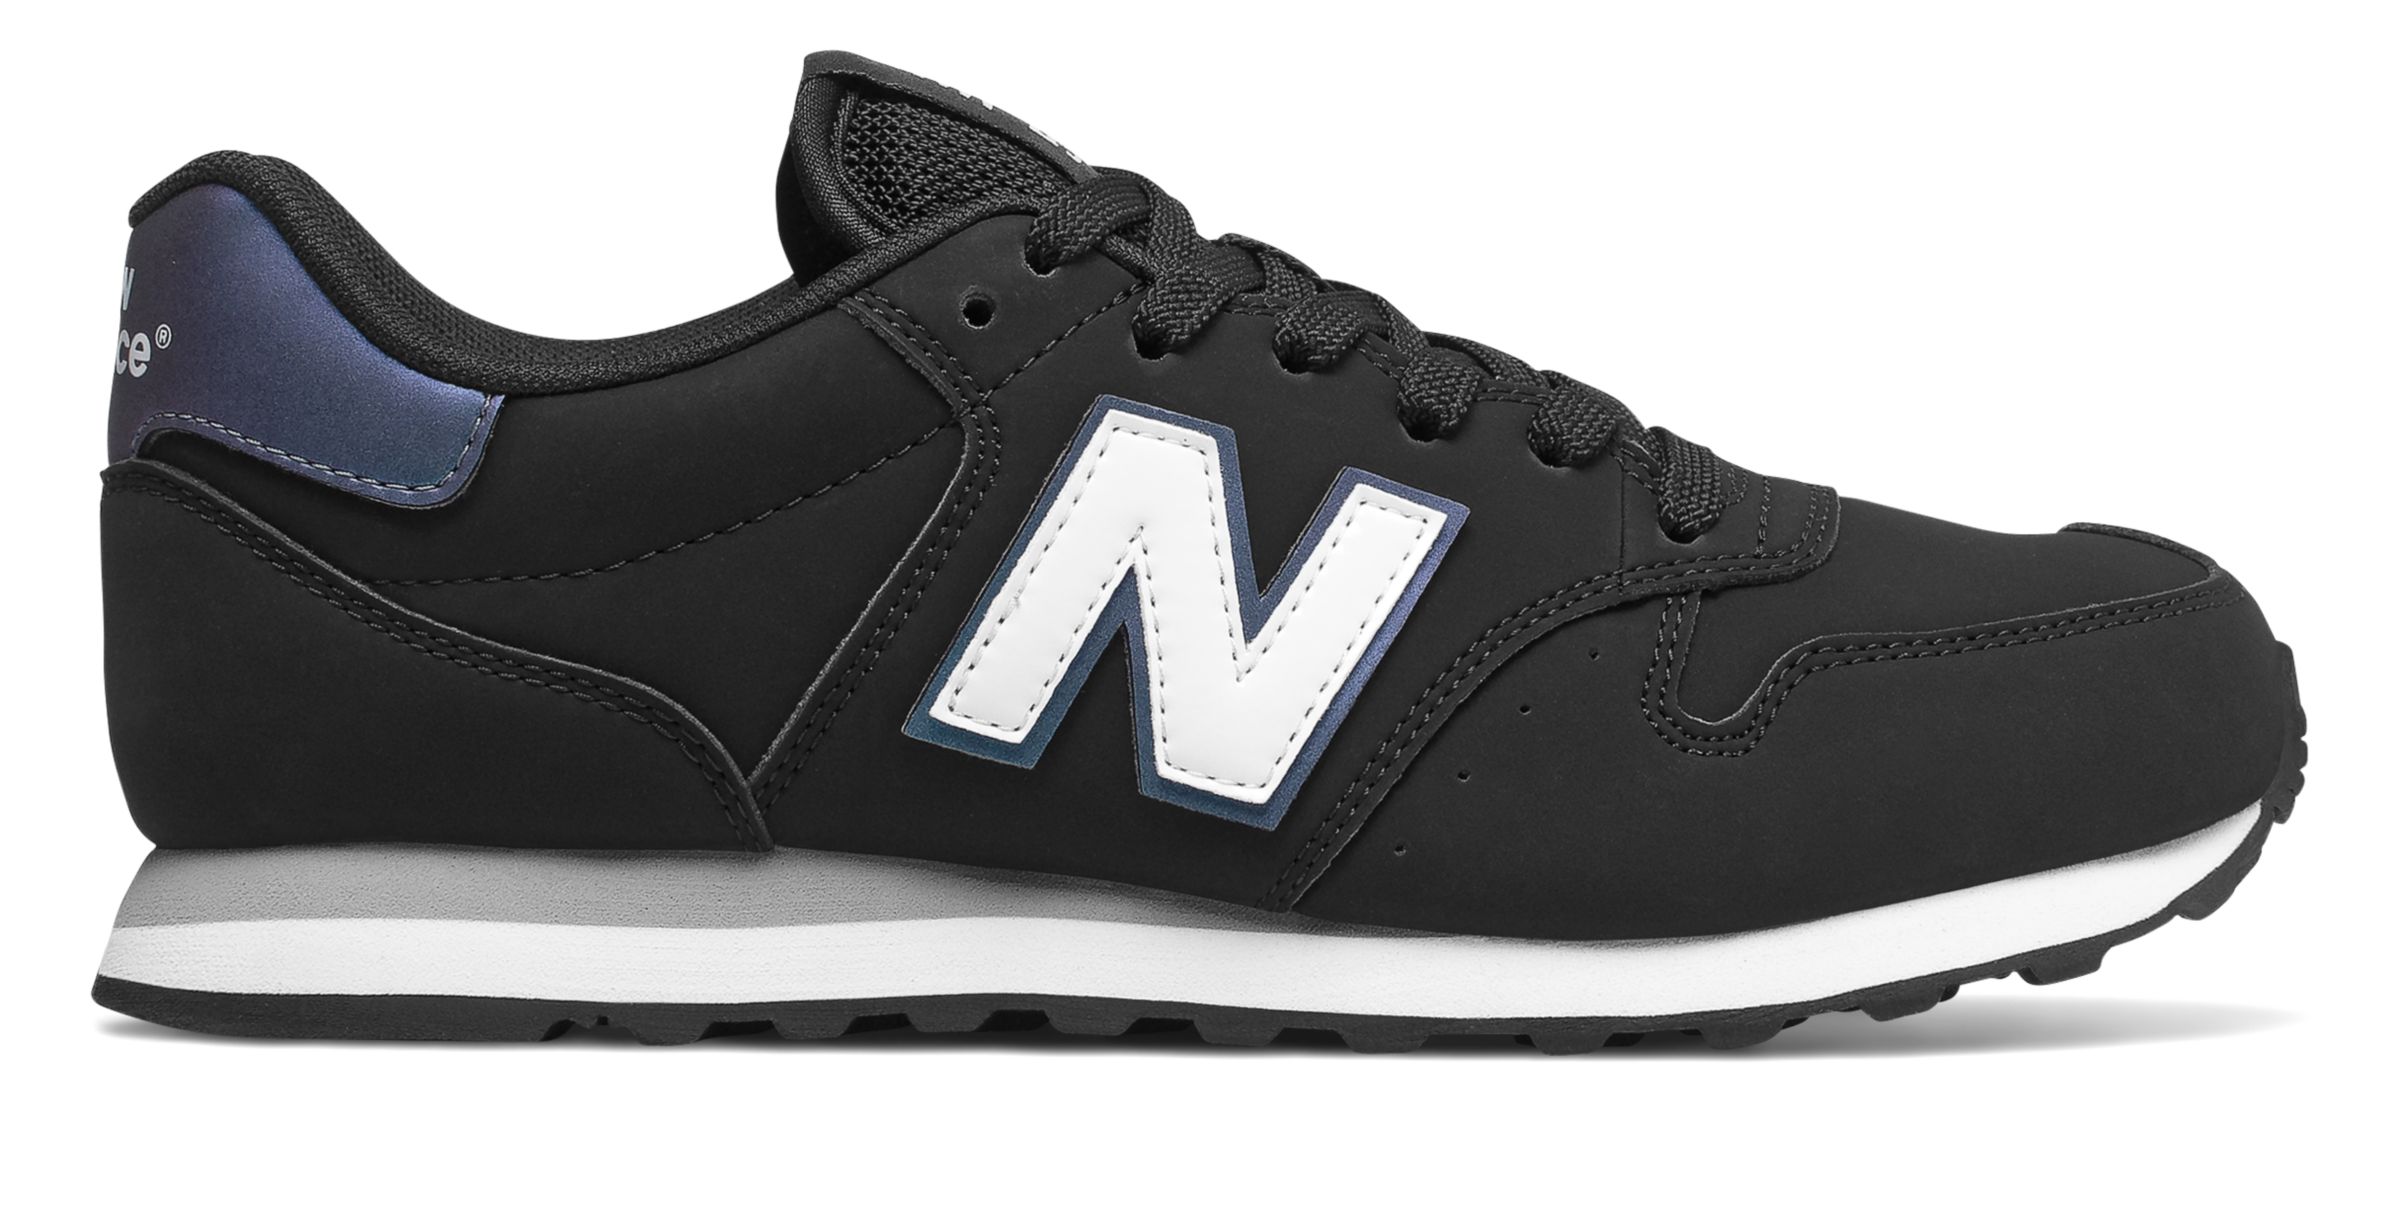 Women's Sneakers & Athletic Apparel | New Balance